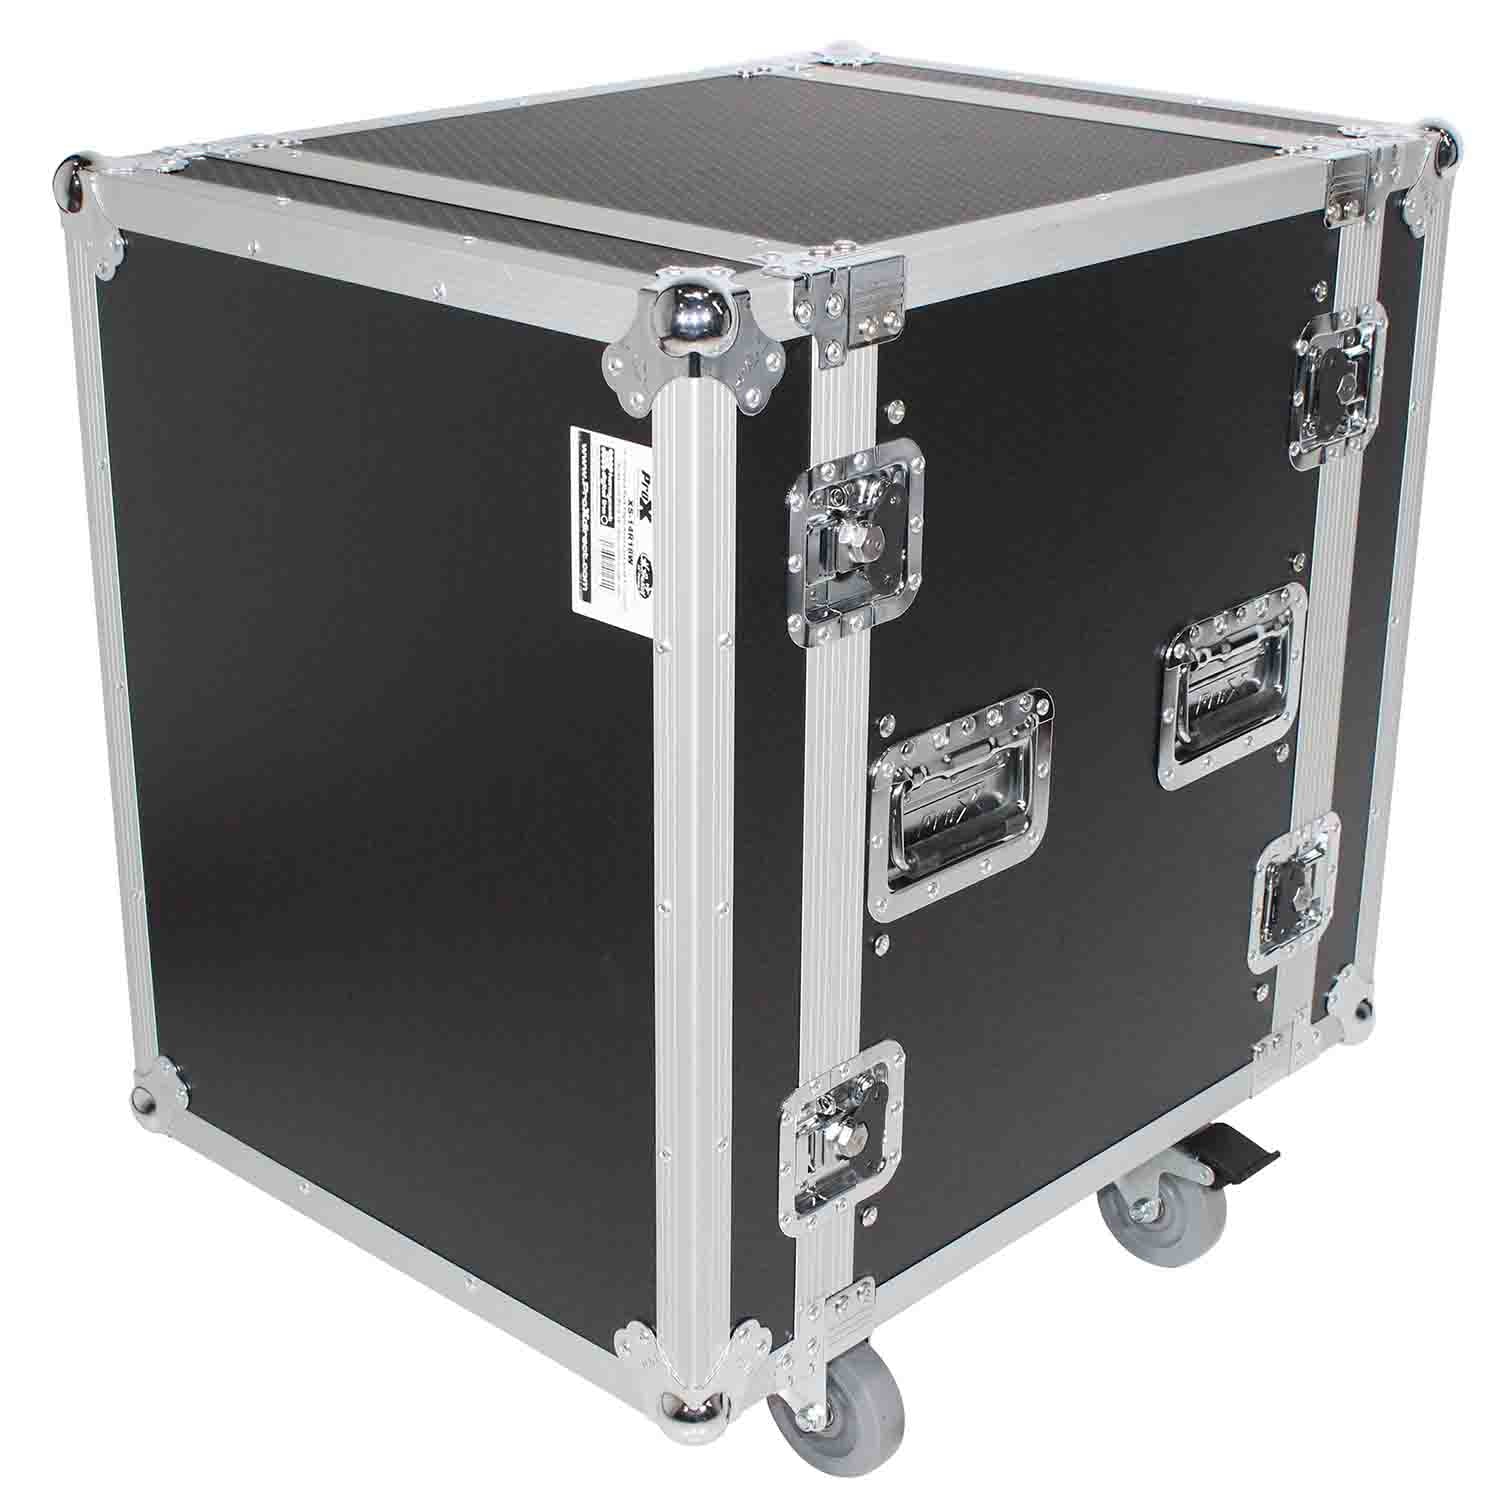 ProX XS-14R18W, 14U Space Amp Rack Mount ATA Flight Case 18 Inch Depth with Casters - Hollywood DJ